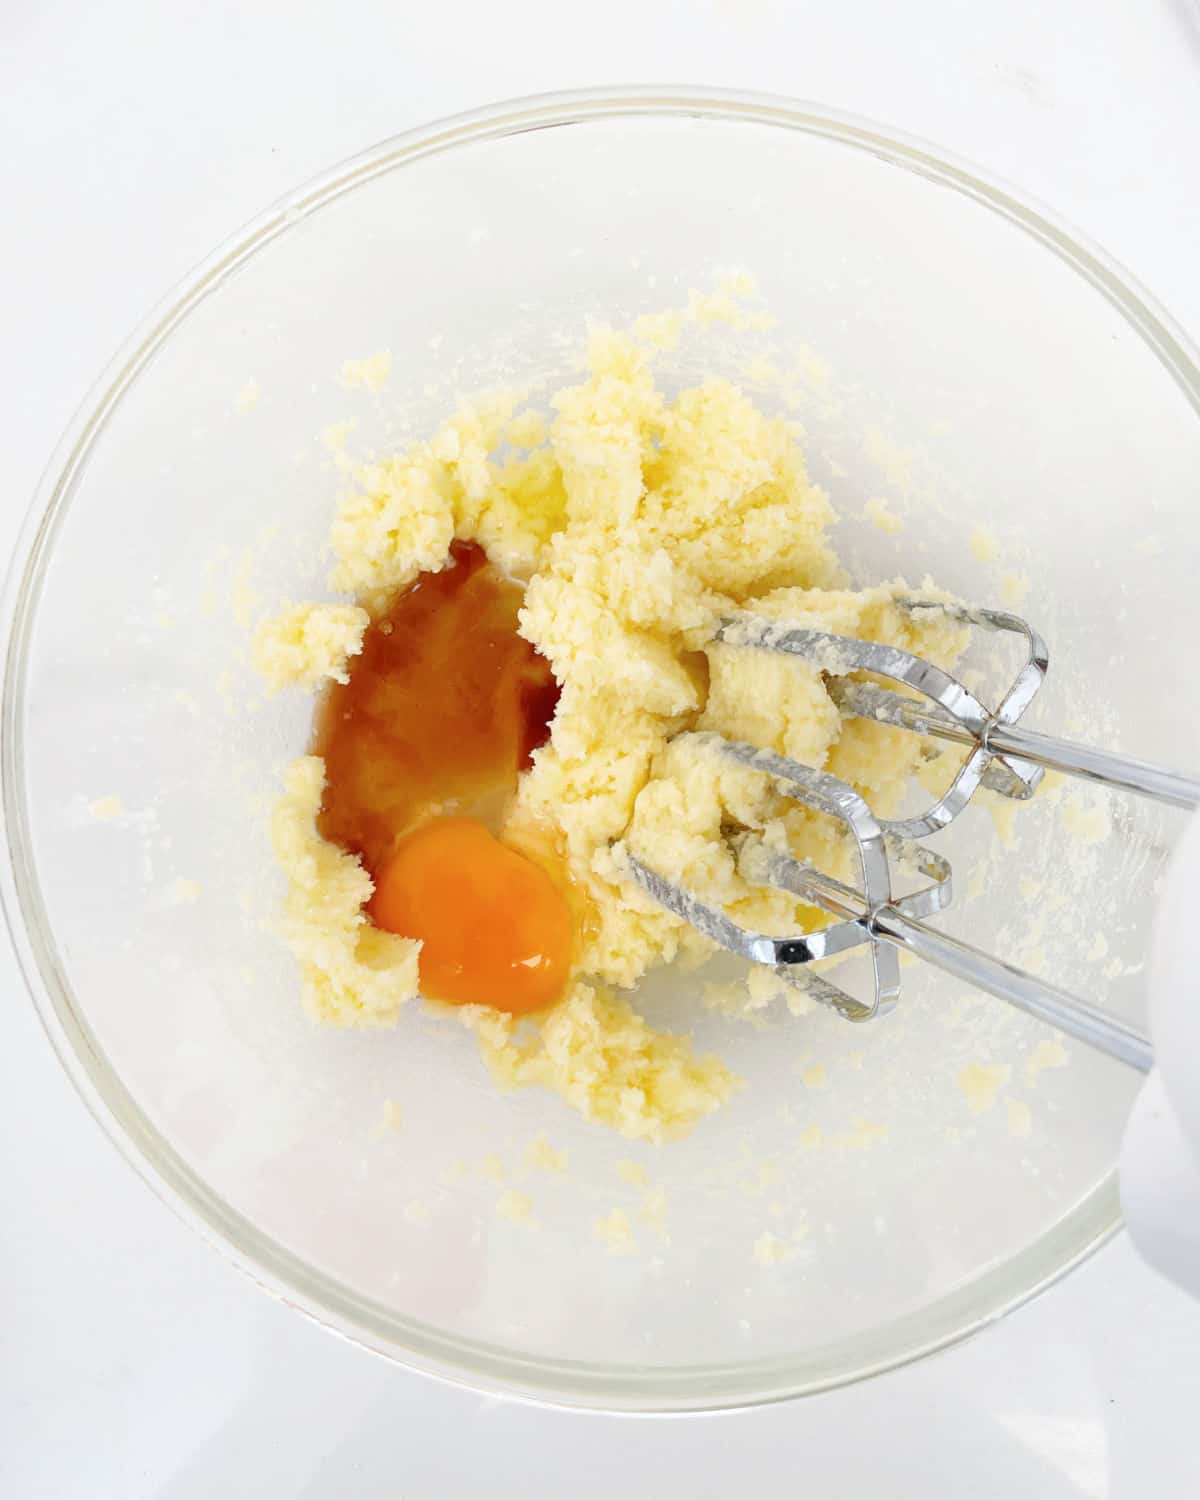 Glass bowl on a white surface containing butter and sugar mixture with cinnamon and eggs. Electric mixer inside.